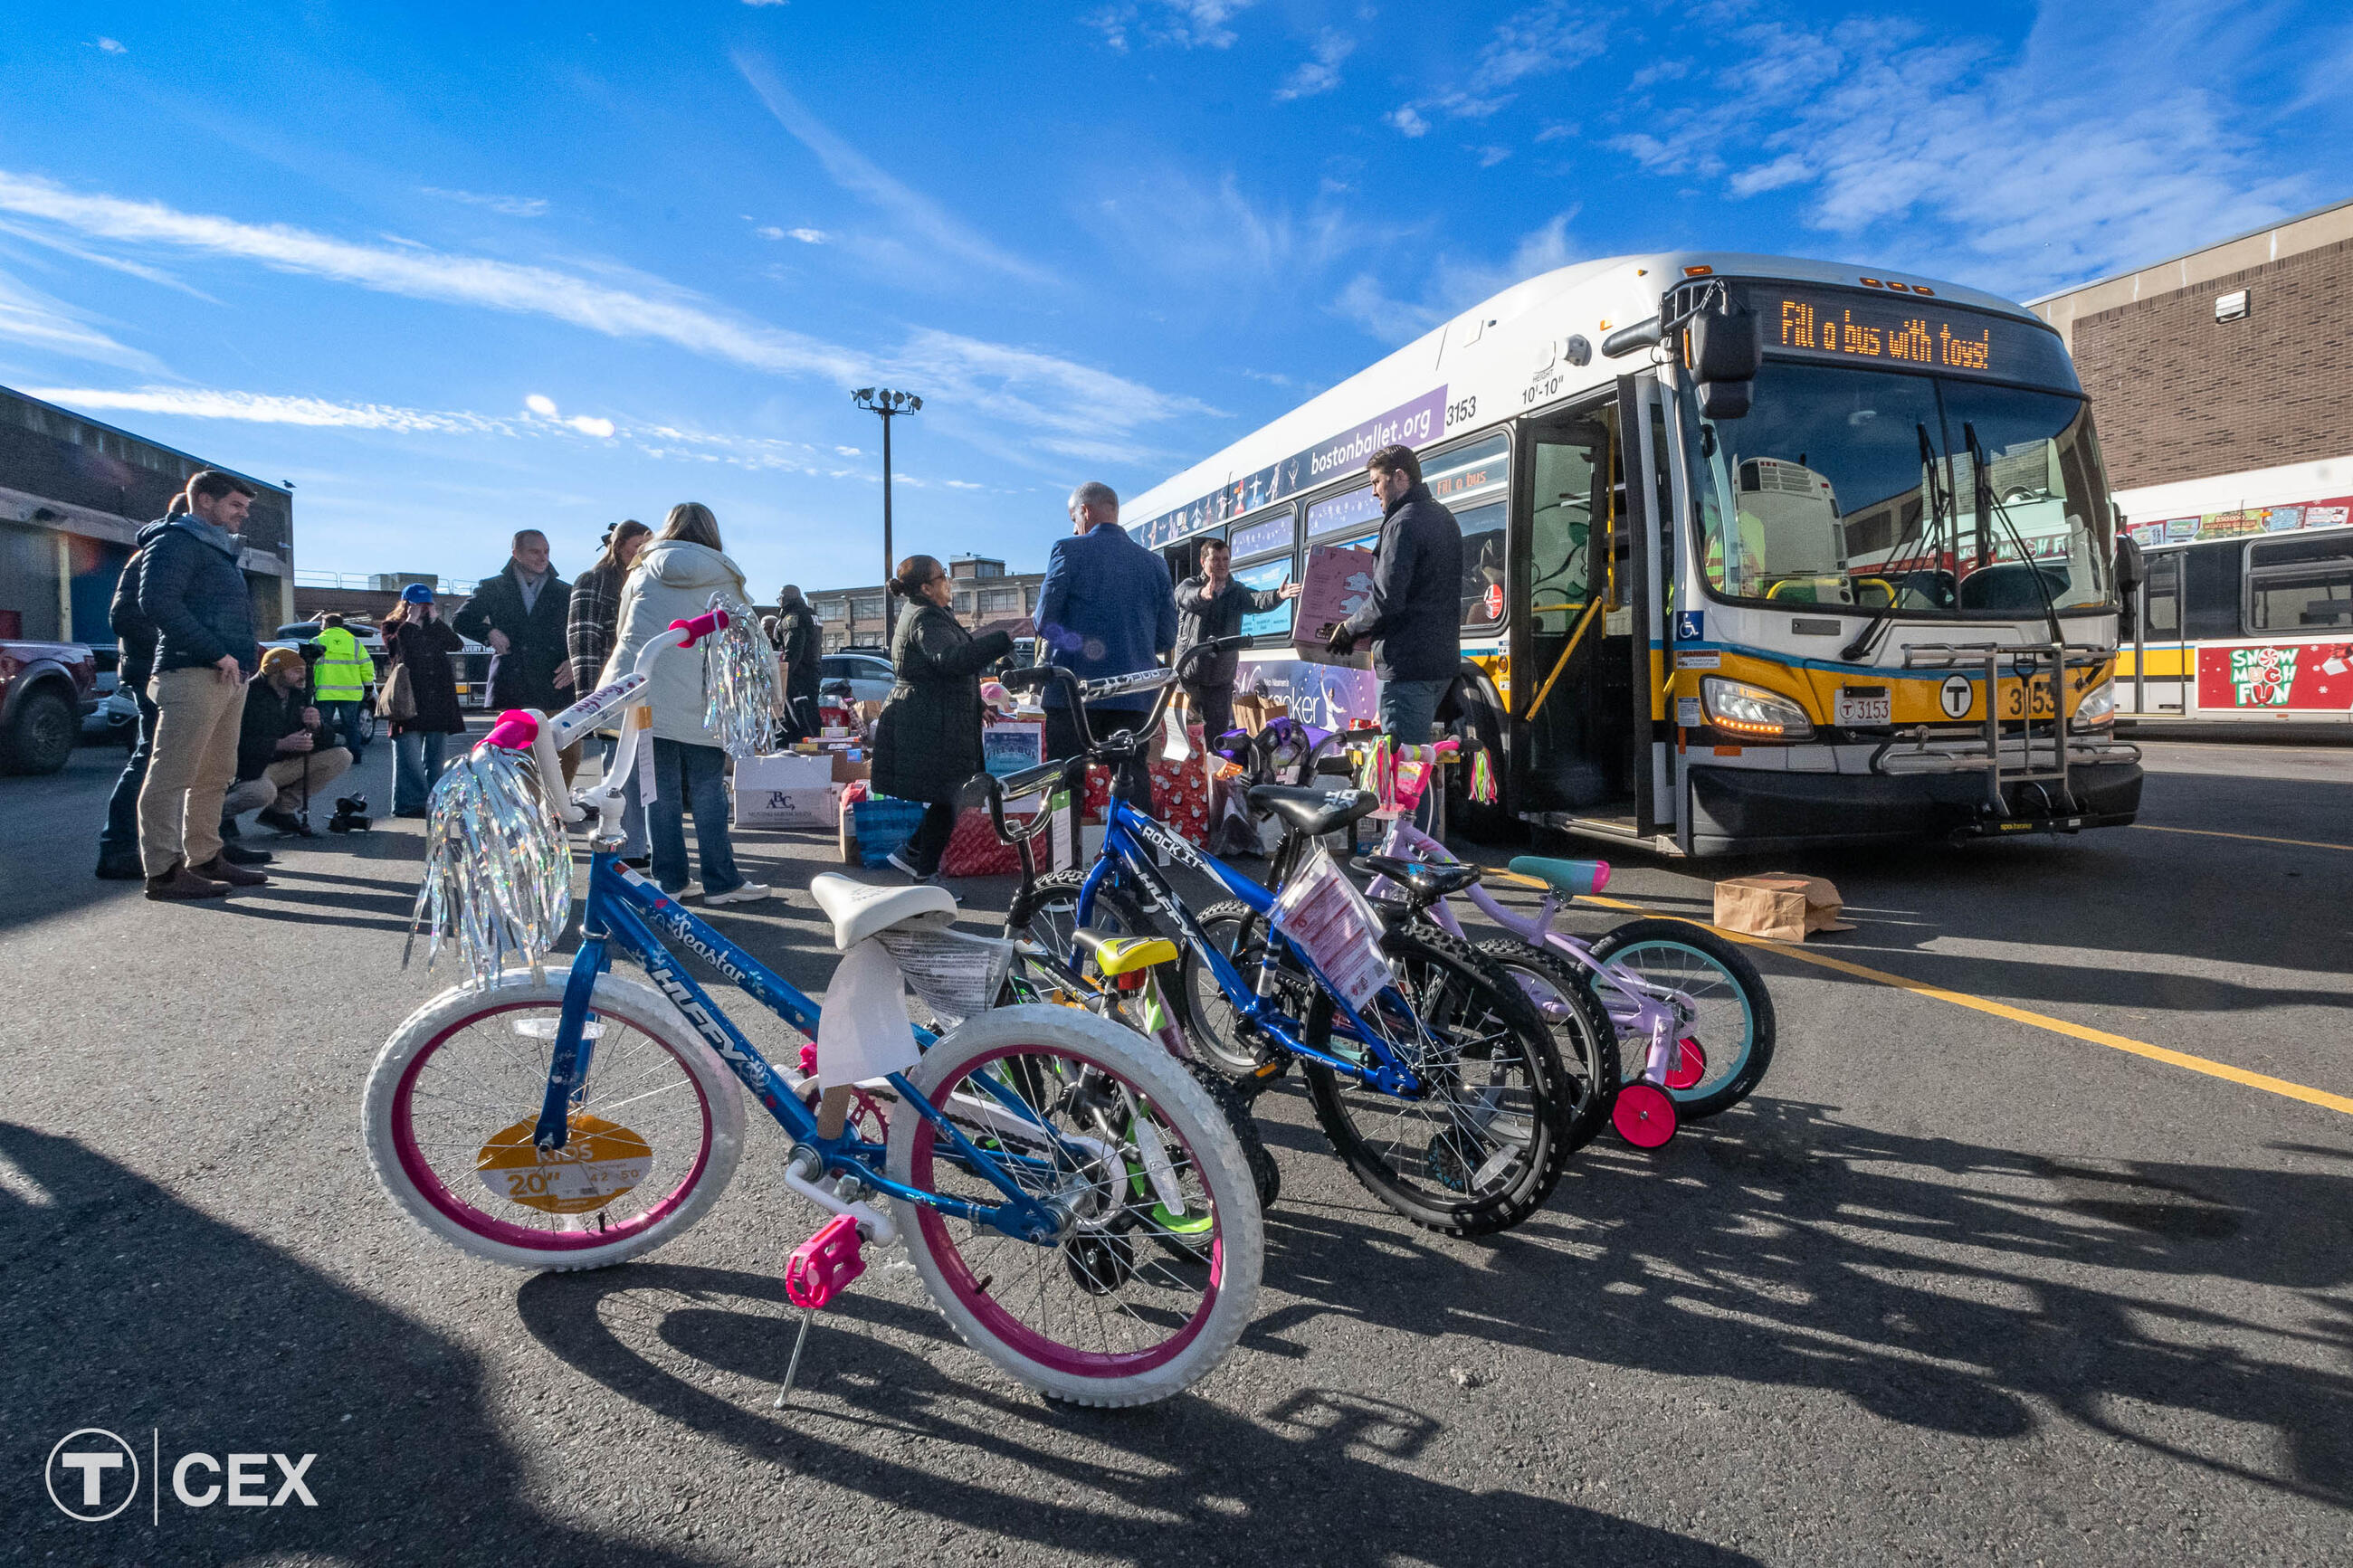 MBTA and MassDOT employees filled a bus with 2,336 gifts this year.